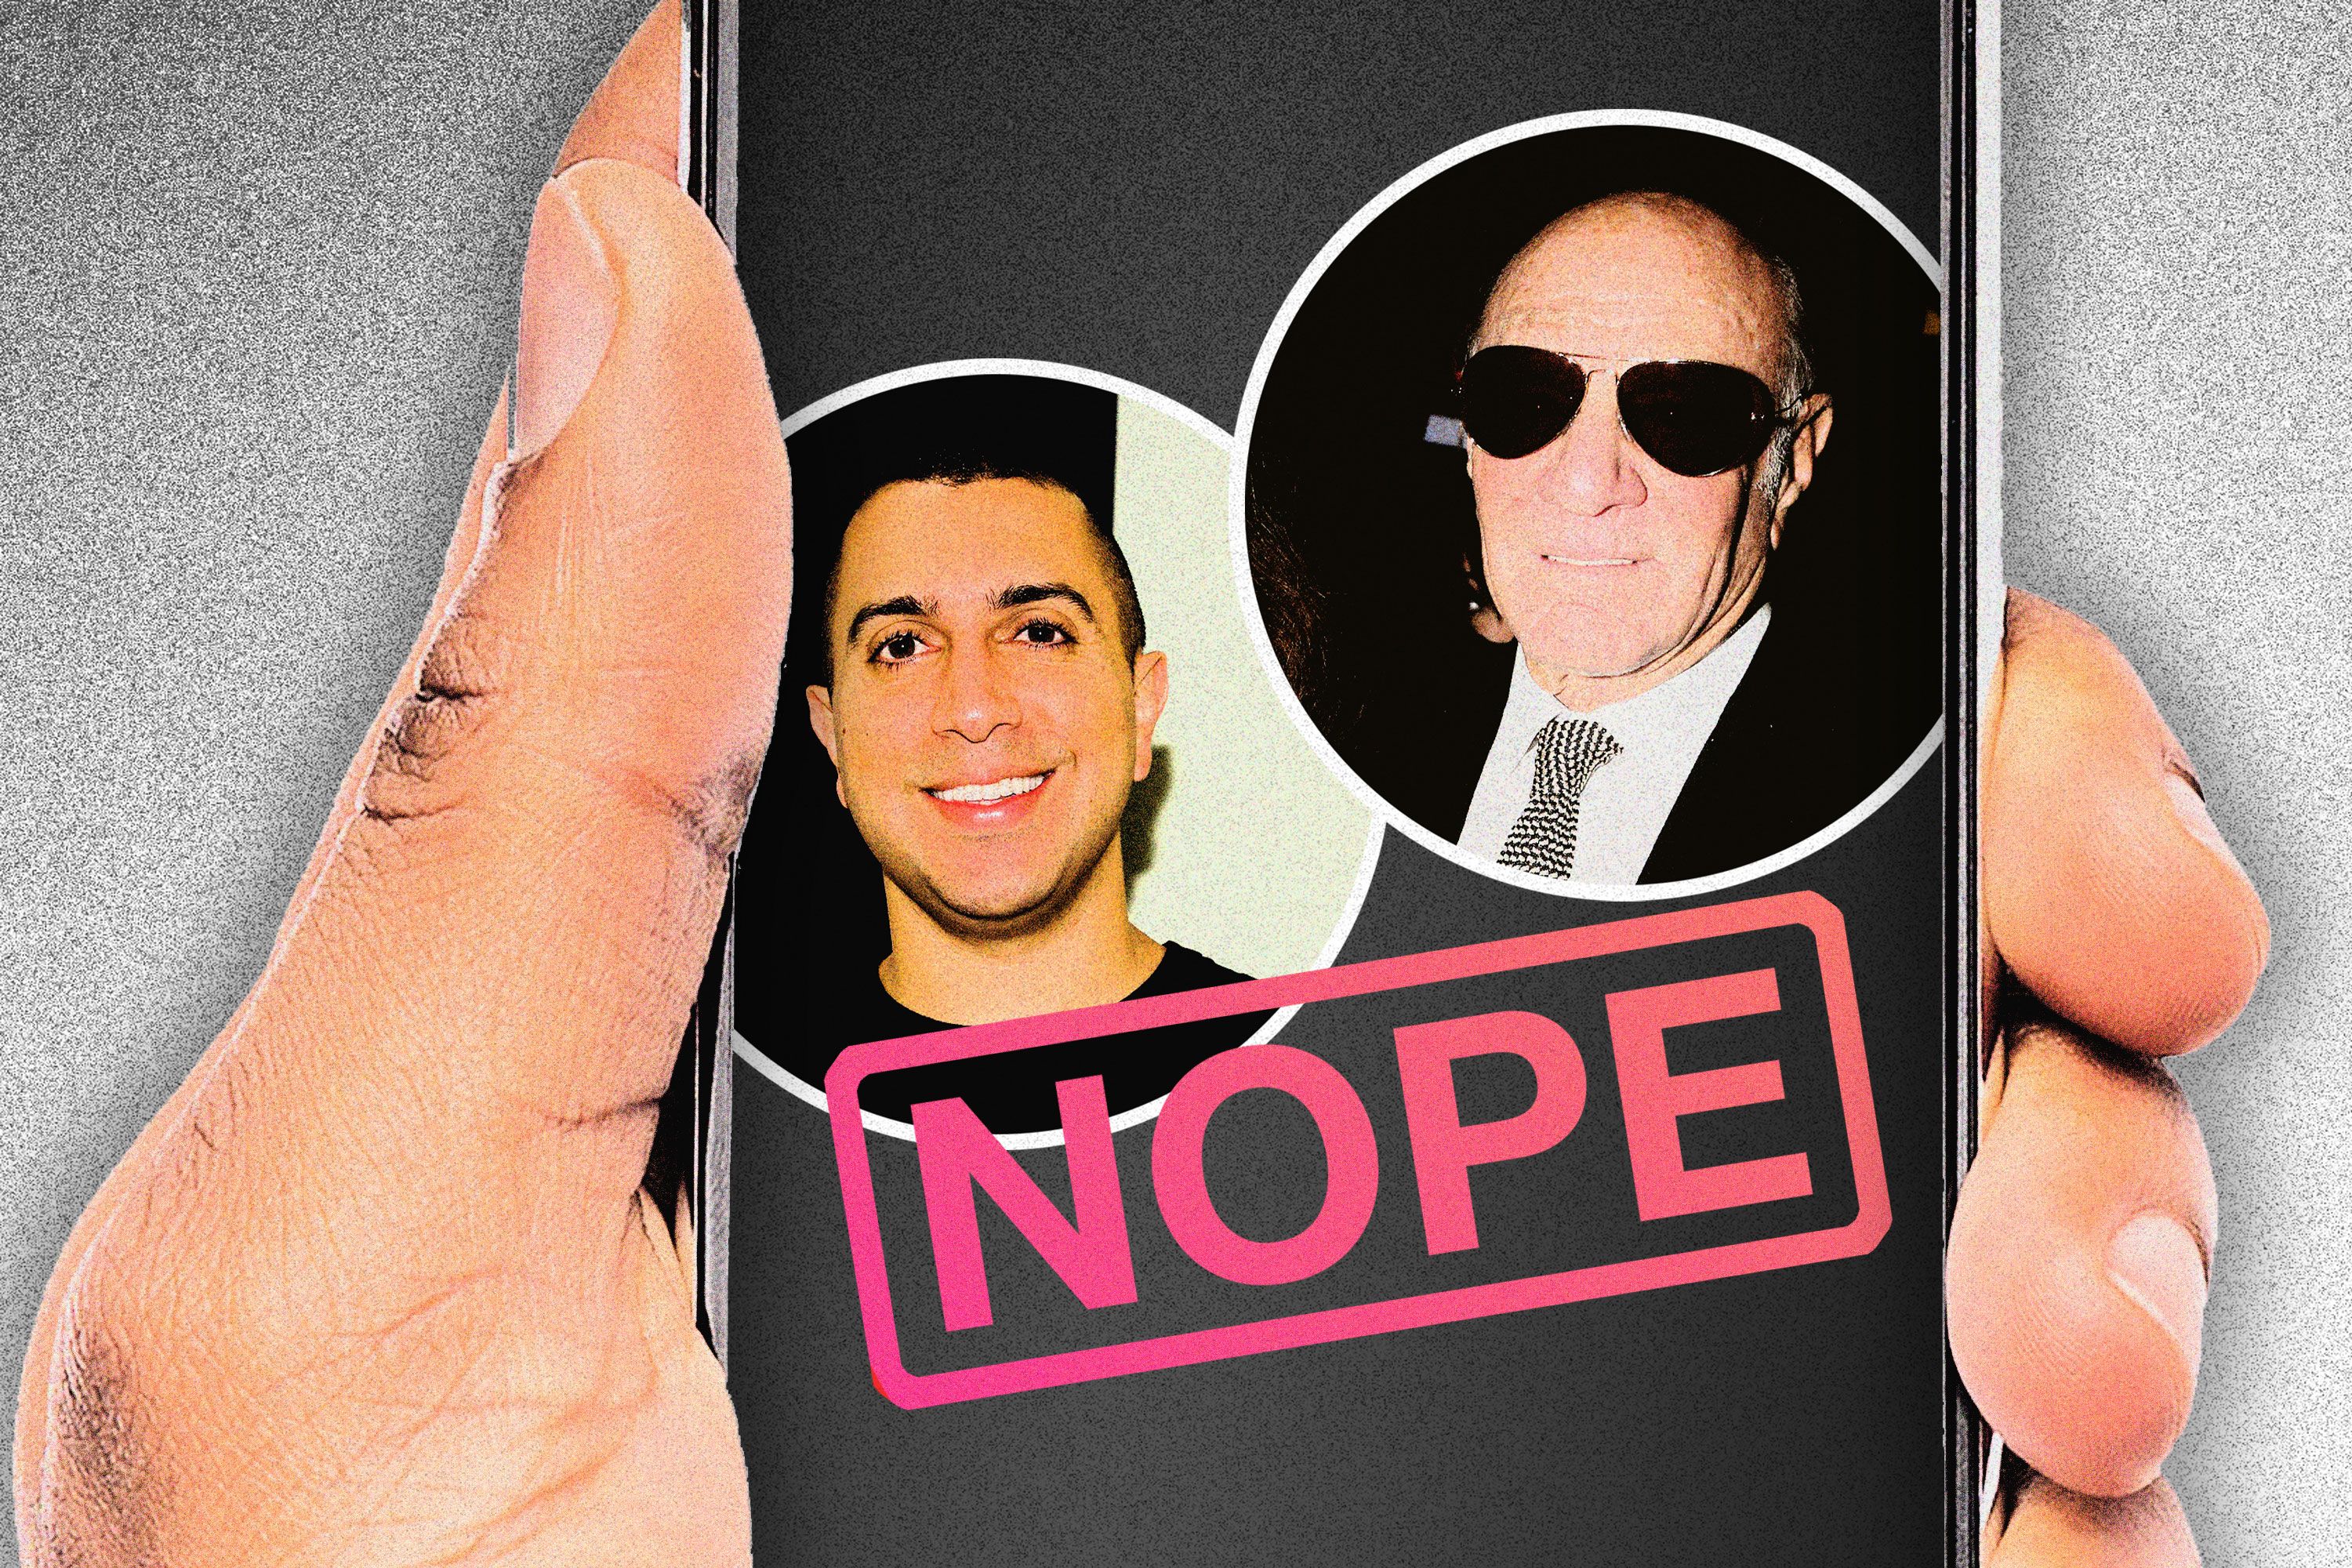 The Tinder Revenge Story Between Sean Rad and Barry Diller picture